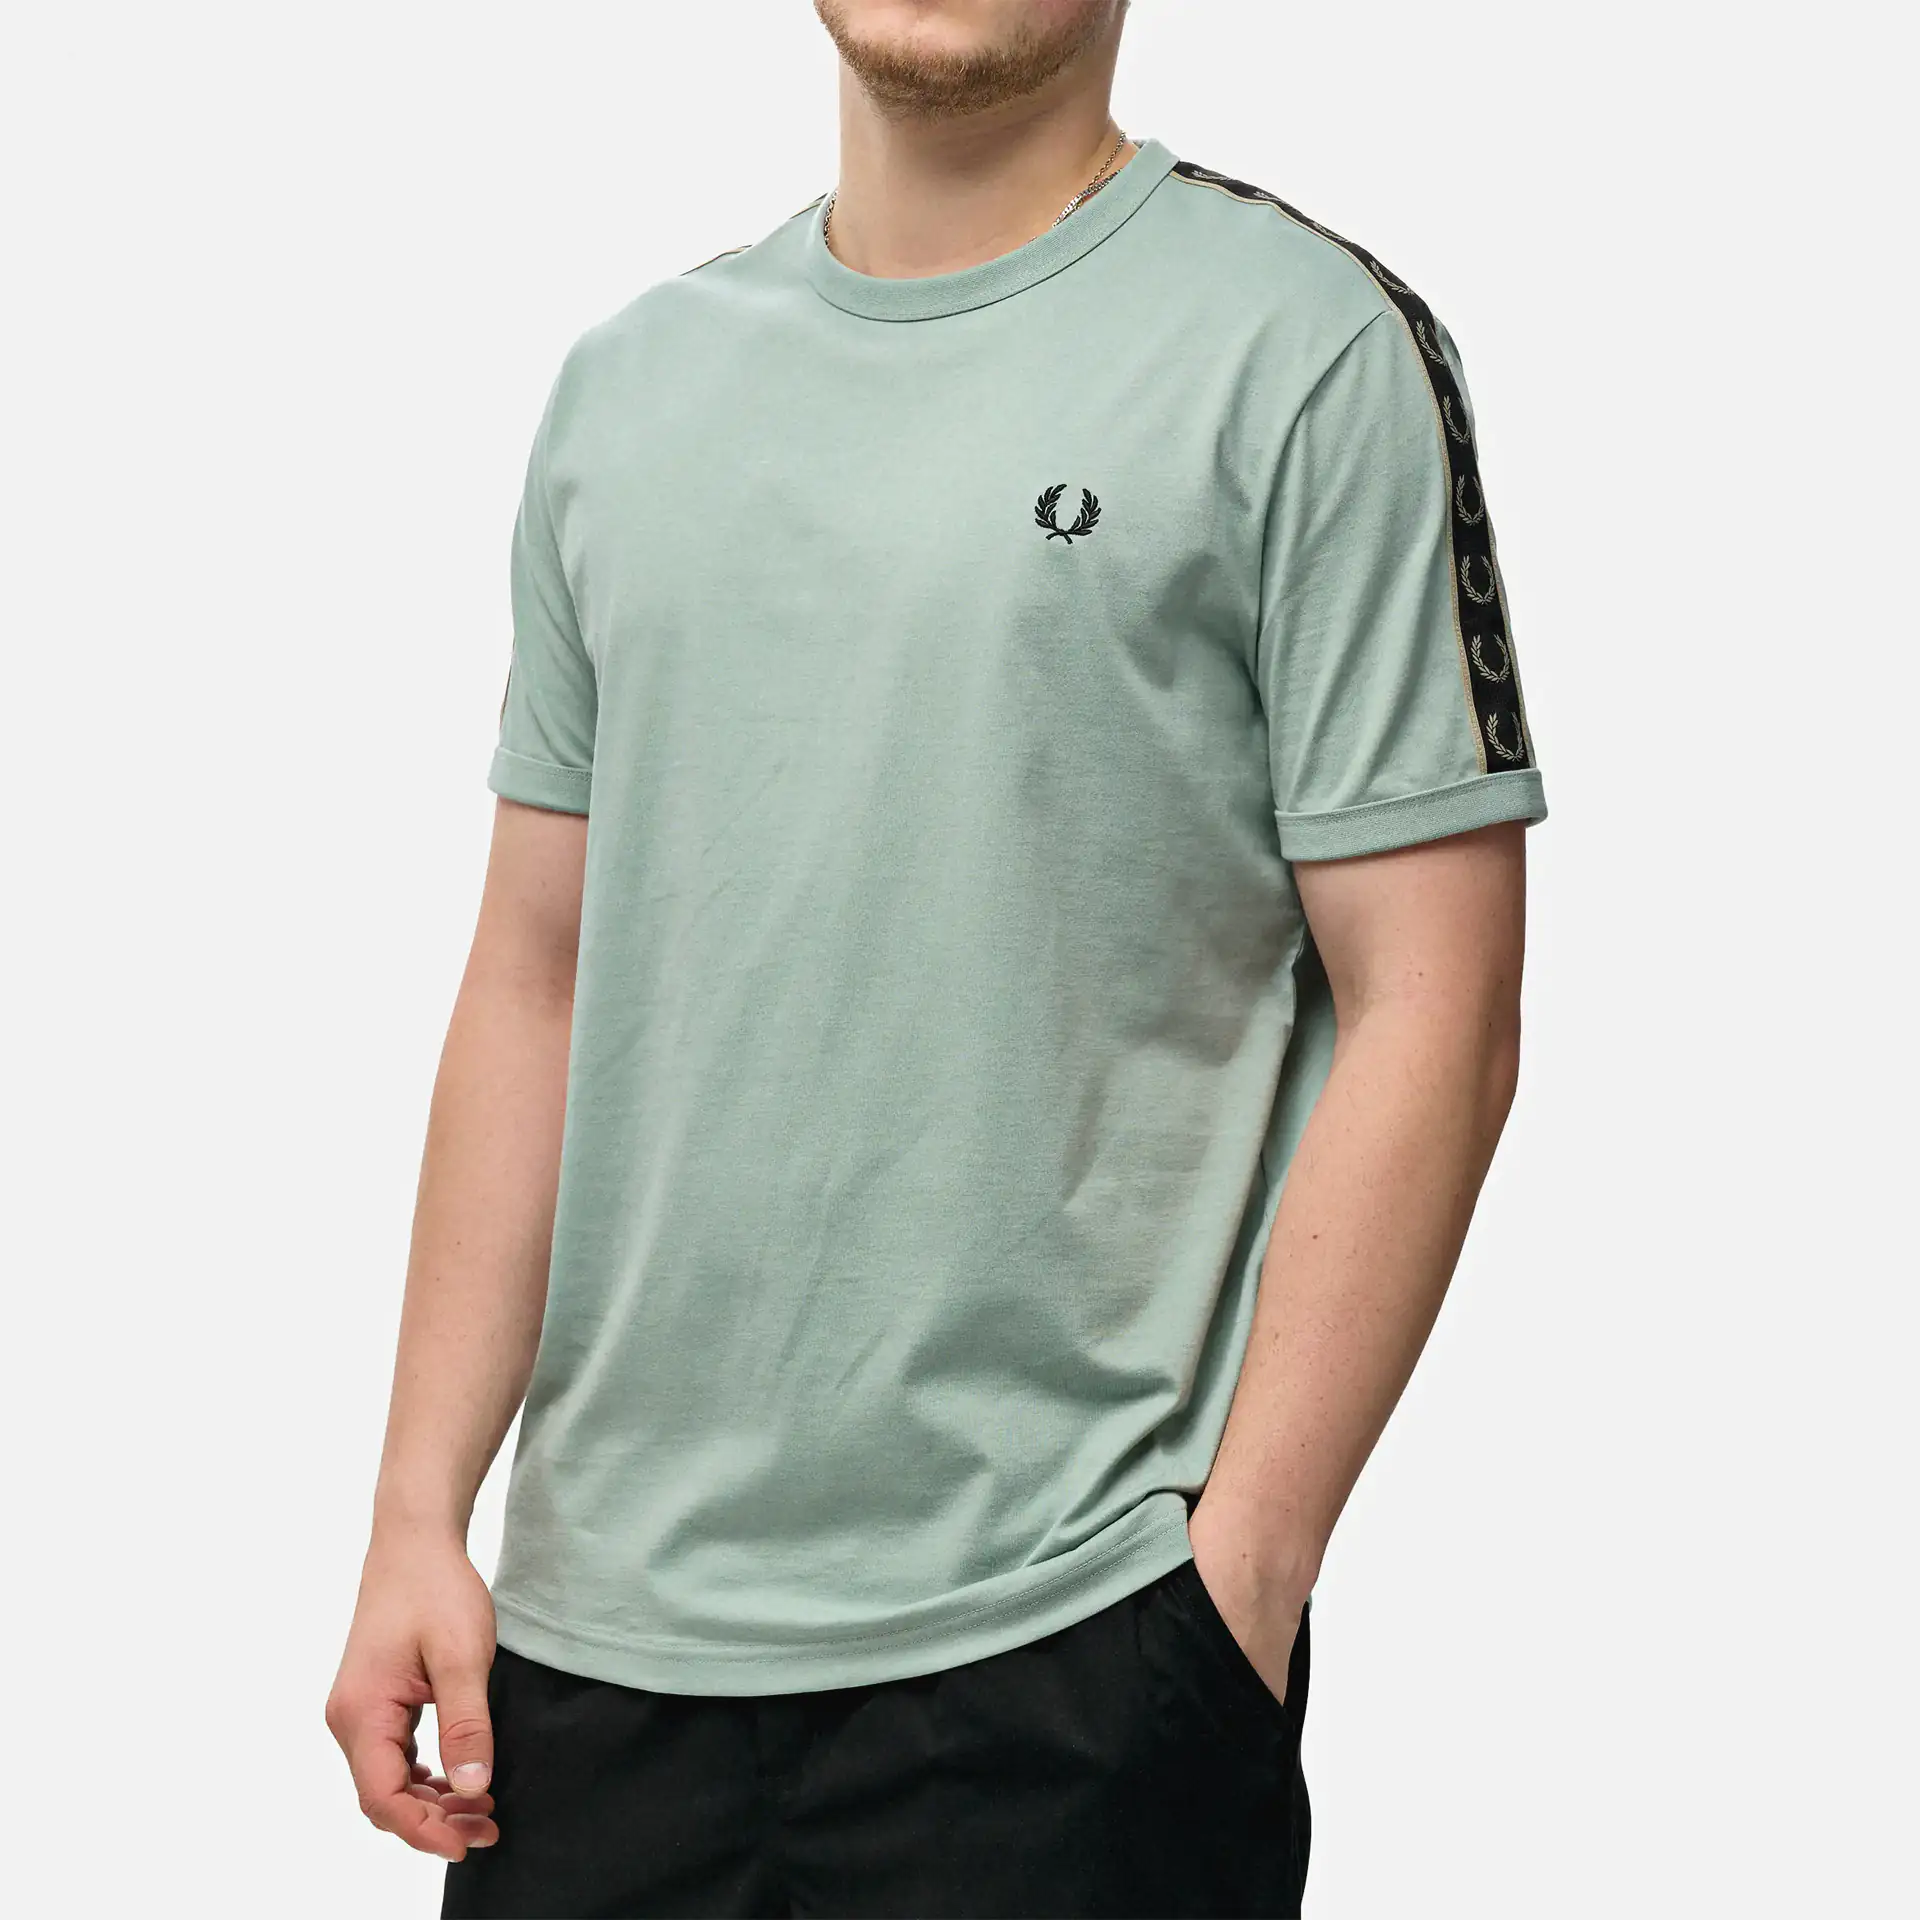 Fred Perry Contrast Tape Ringer T-Shirt Silver Blue/Warm Grey